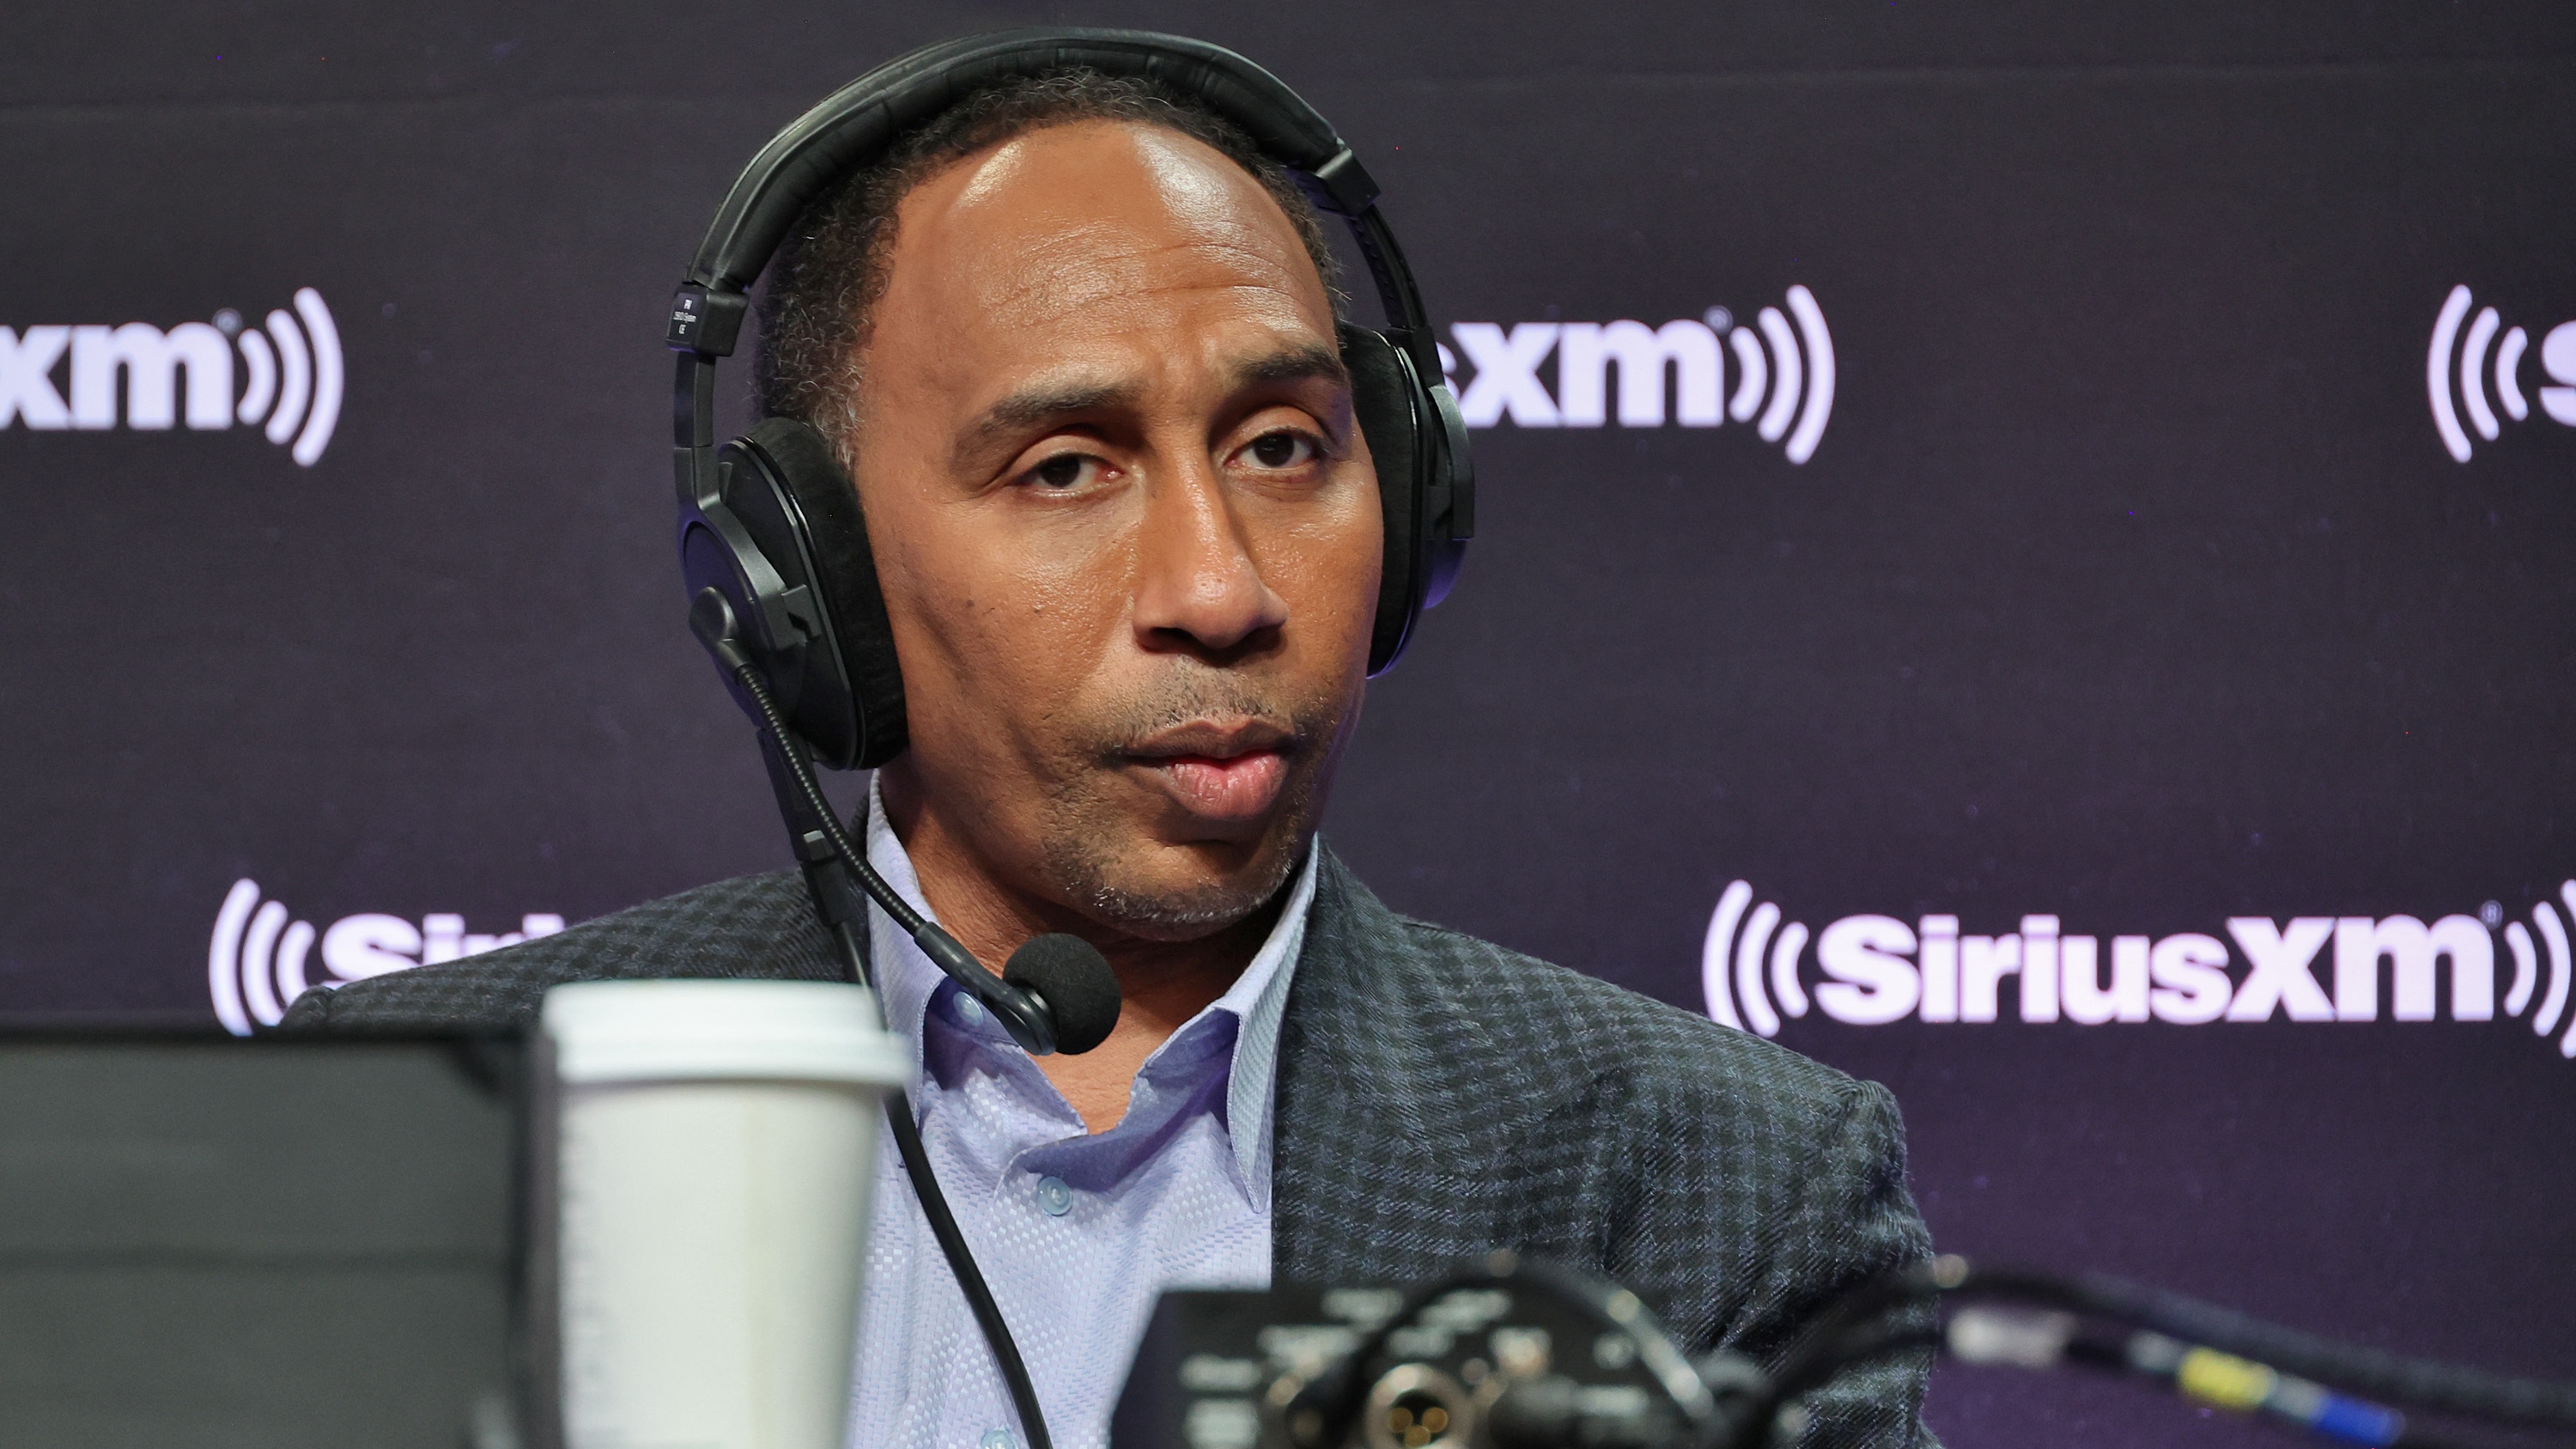 Stephen A Smith asked about Crab Rangoon tweet